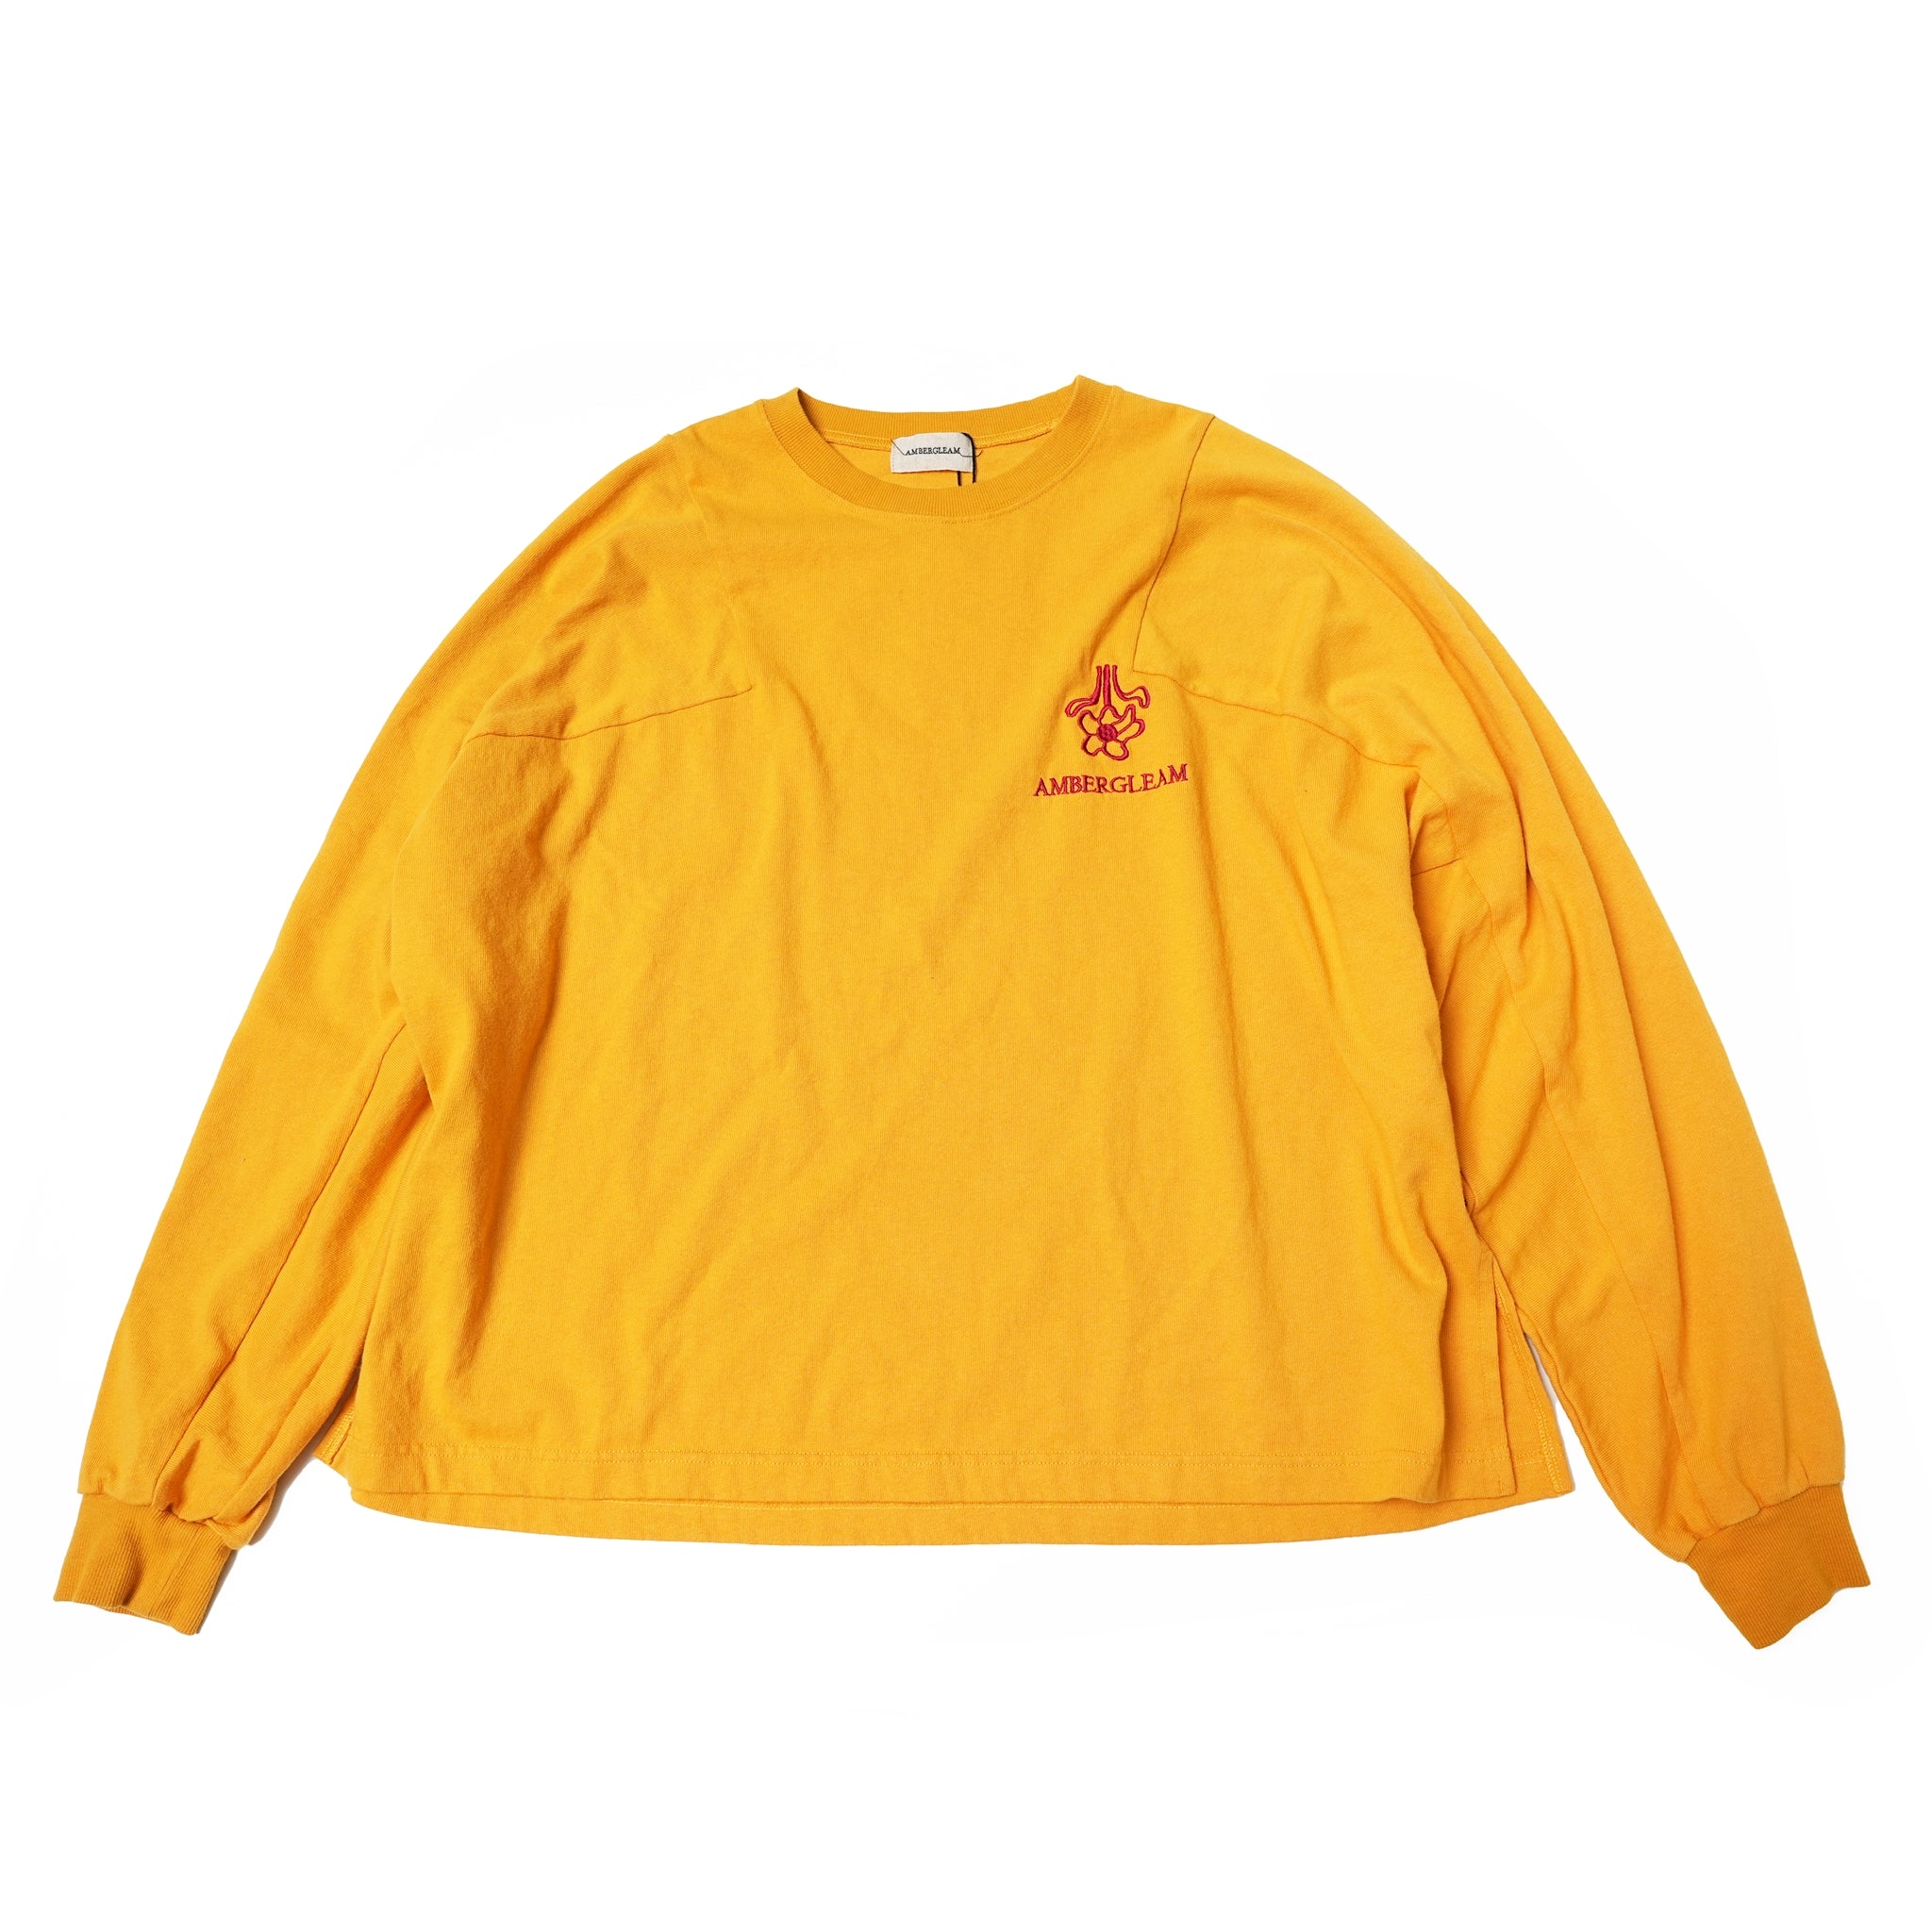 Name:Embroidery Panel Long Sleeve | Color:Ash Whte /Black/Green/Marigold/Redchili【AMBERGLEAM_アンバーグリーム】| No:1169141211